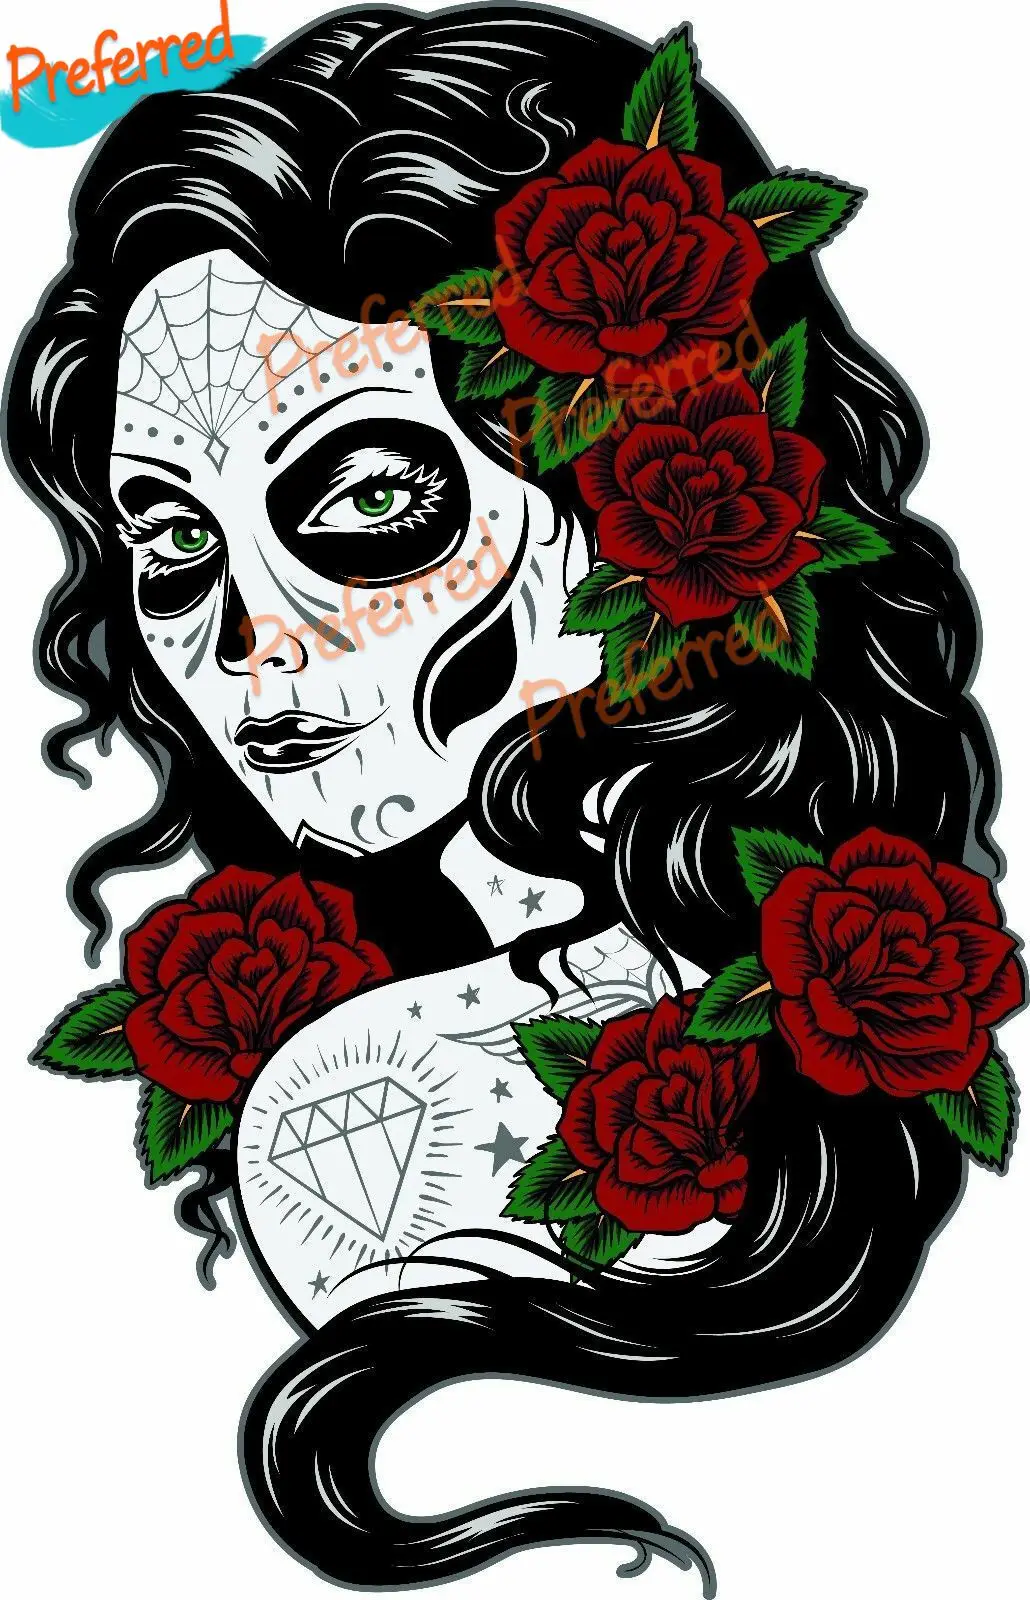 

Mexican Tattoo Sugar Skull Pin Up Girl Sticker Decal-100mm Scary Skull Beauty Skull Boutique Decals for Your Home, Car, Coolers